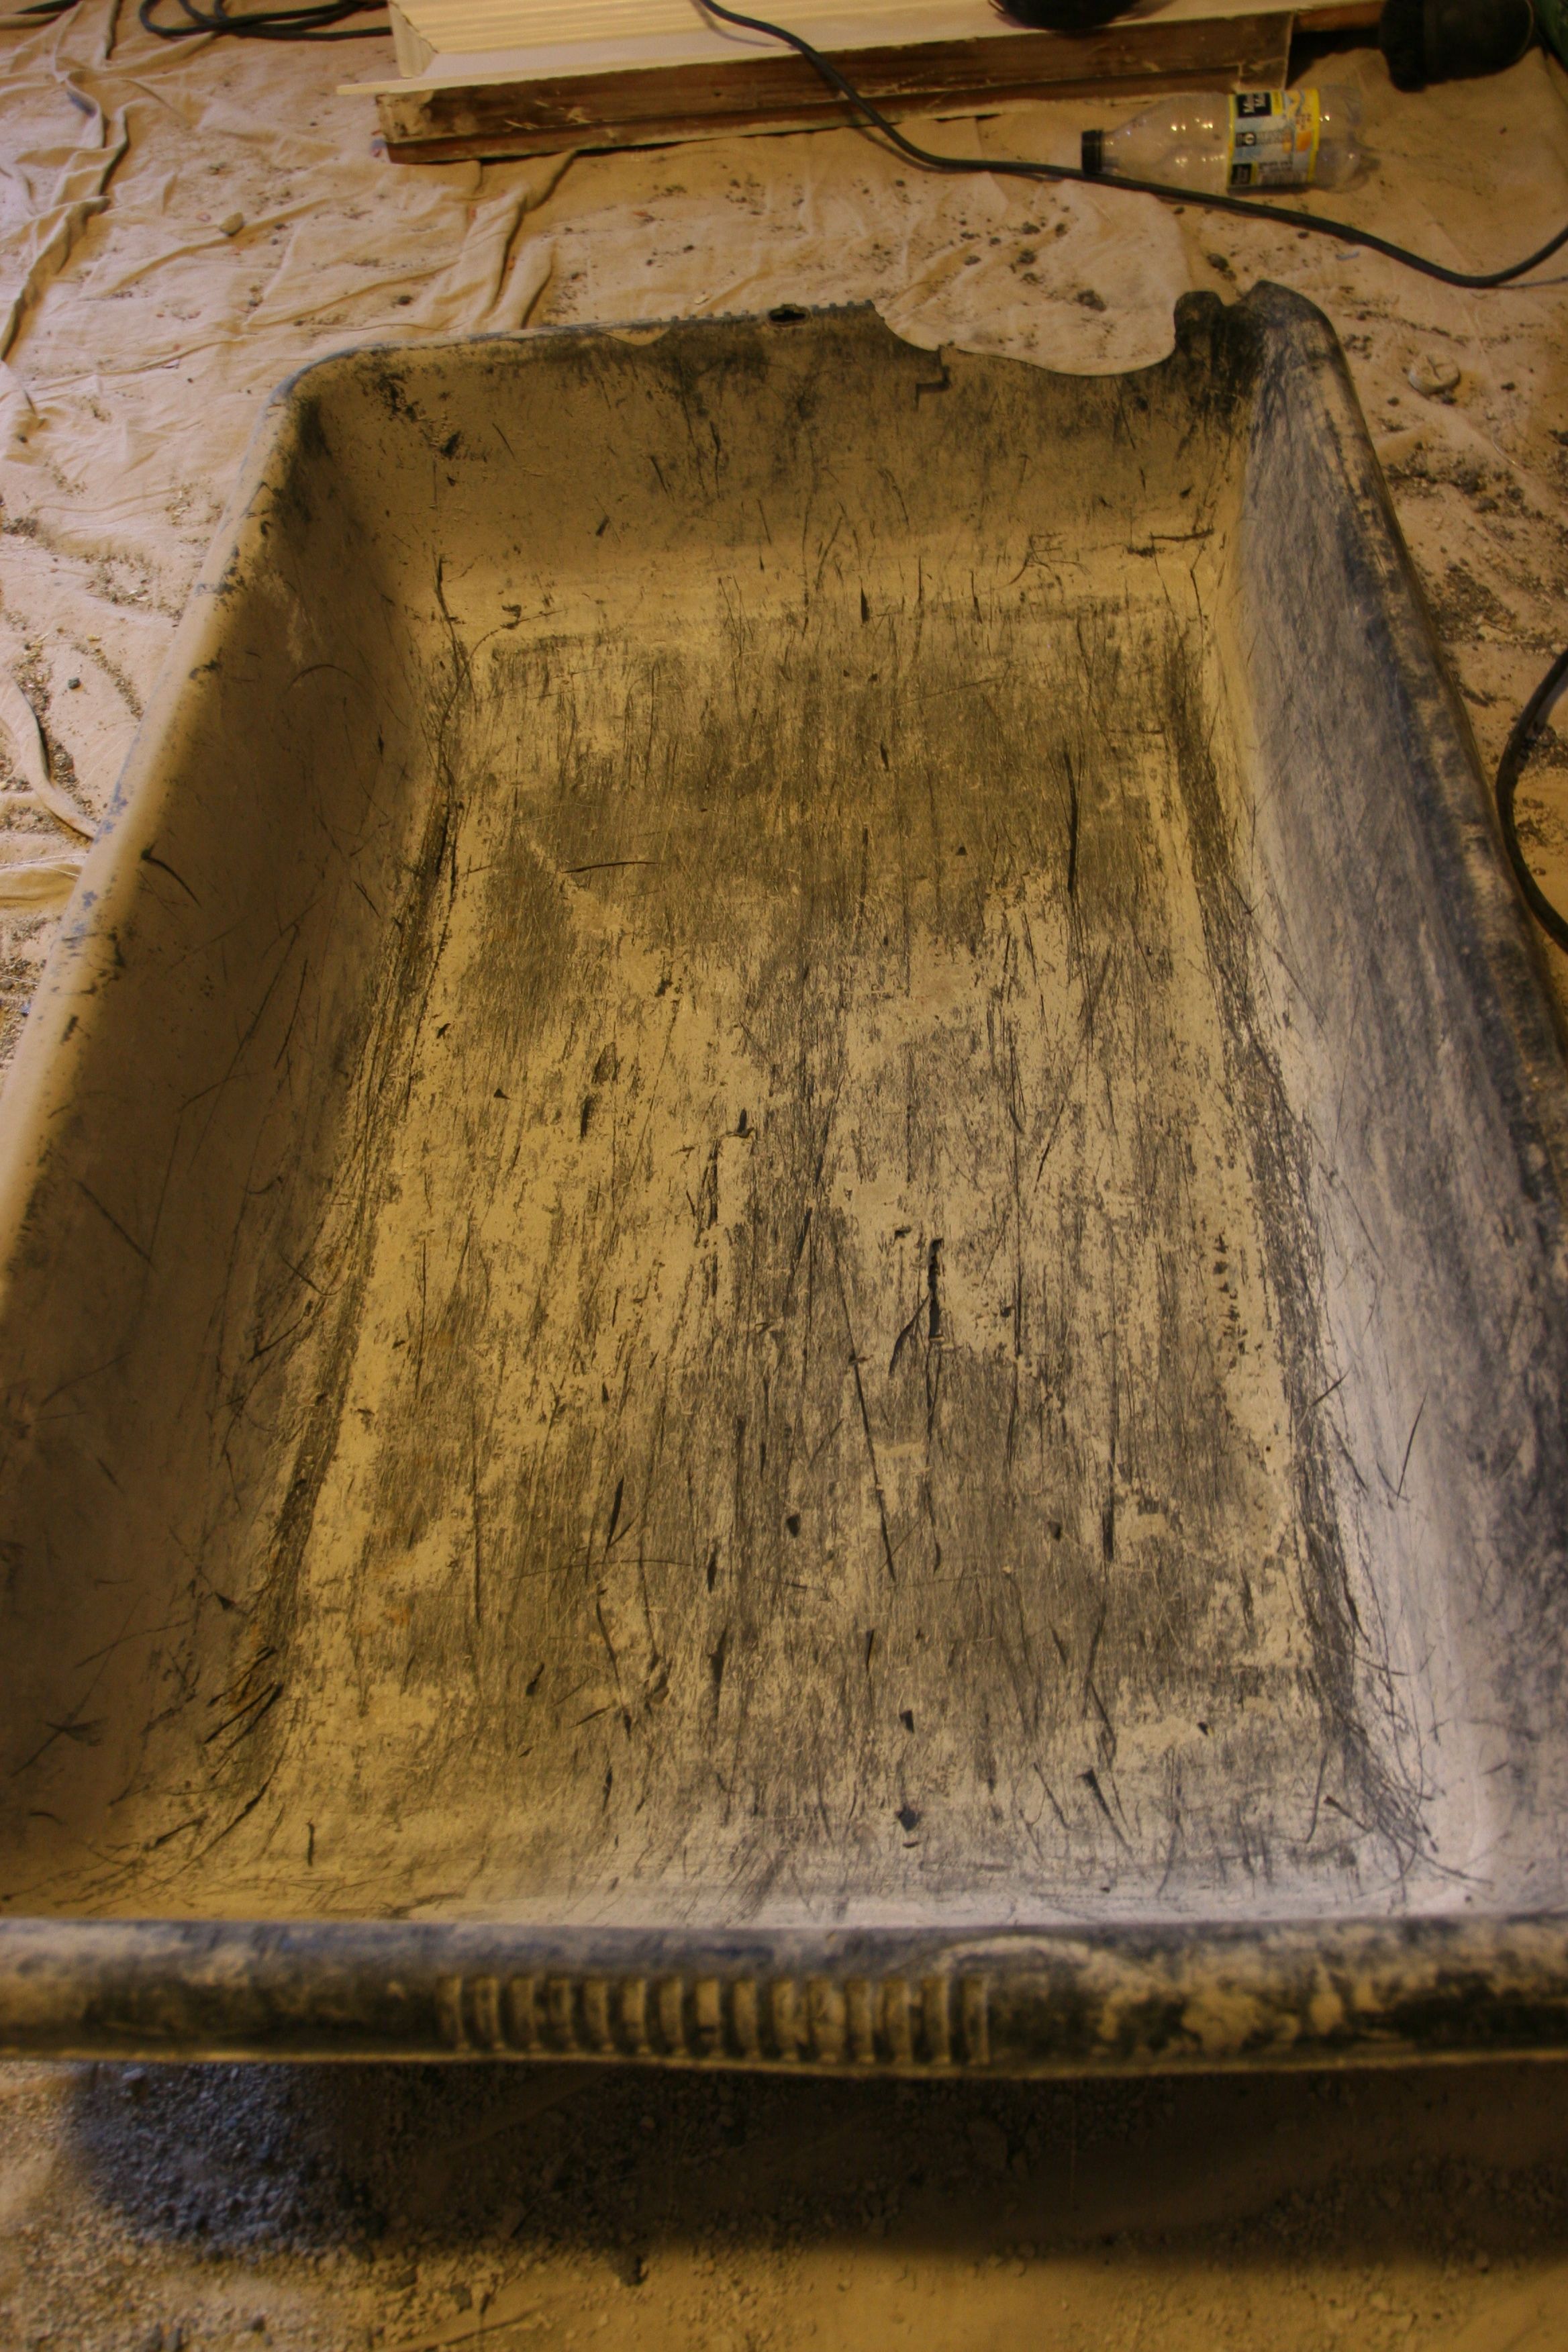 Vessel for mixing said cement.